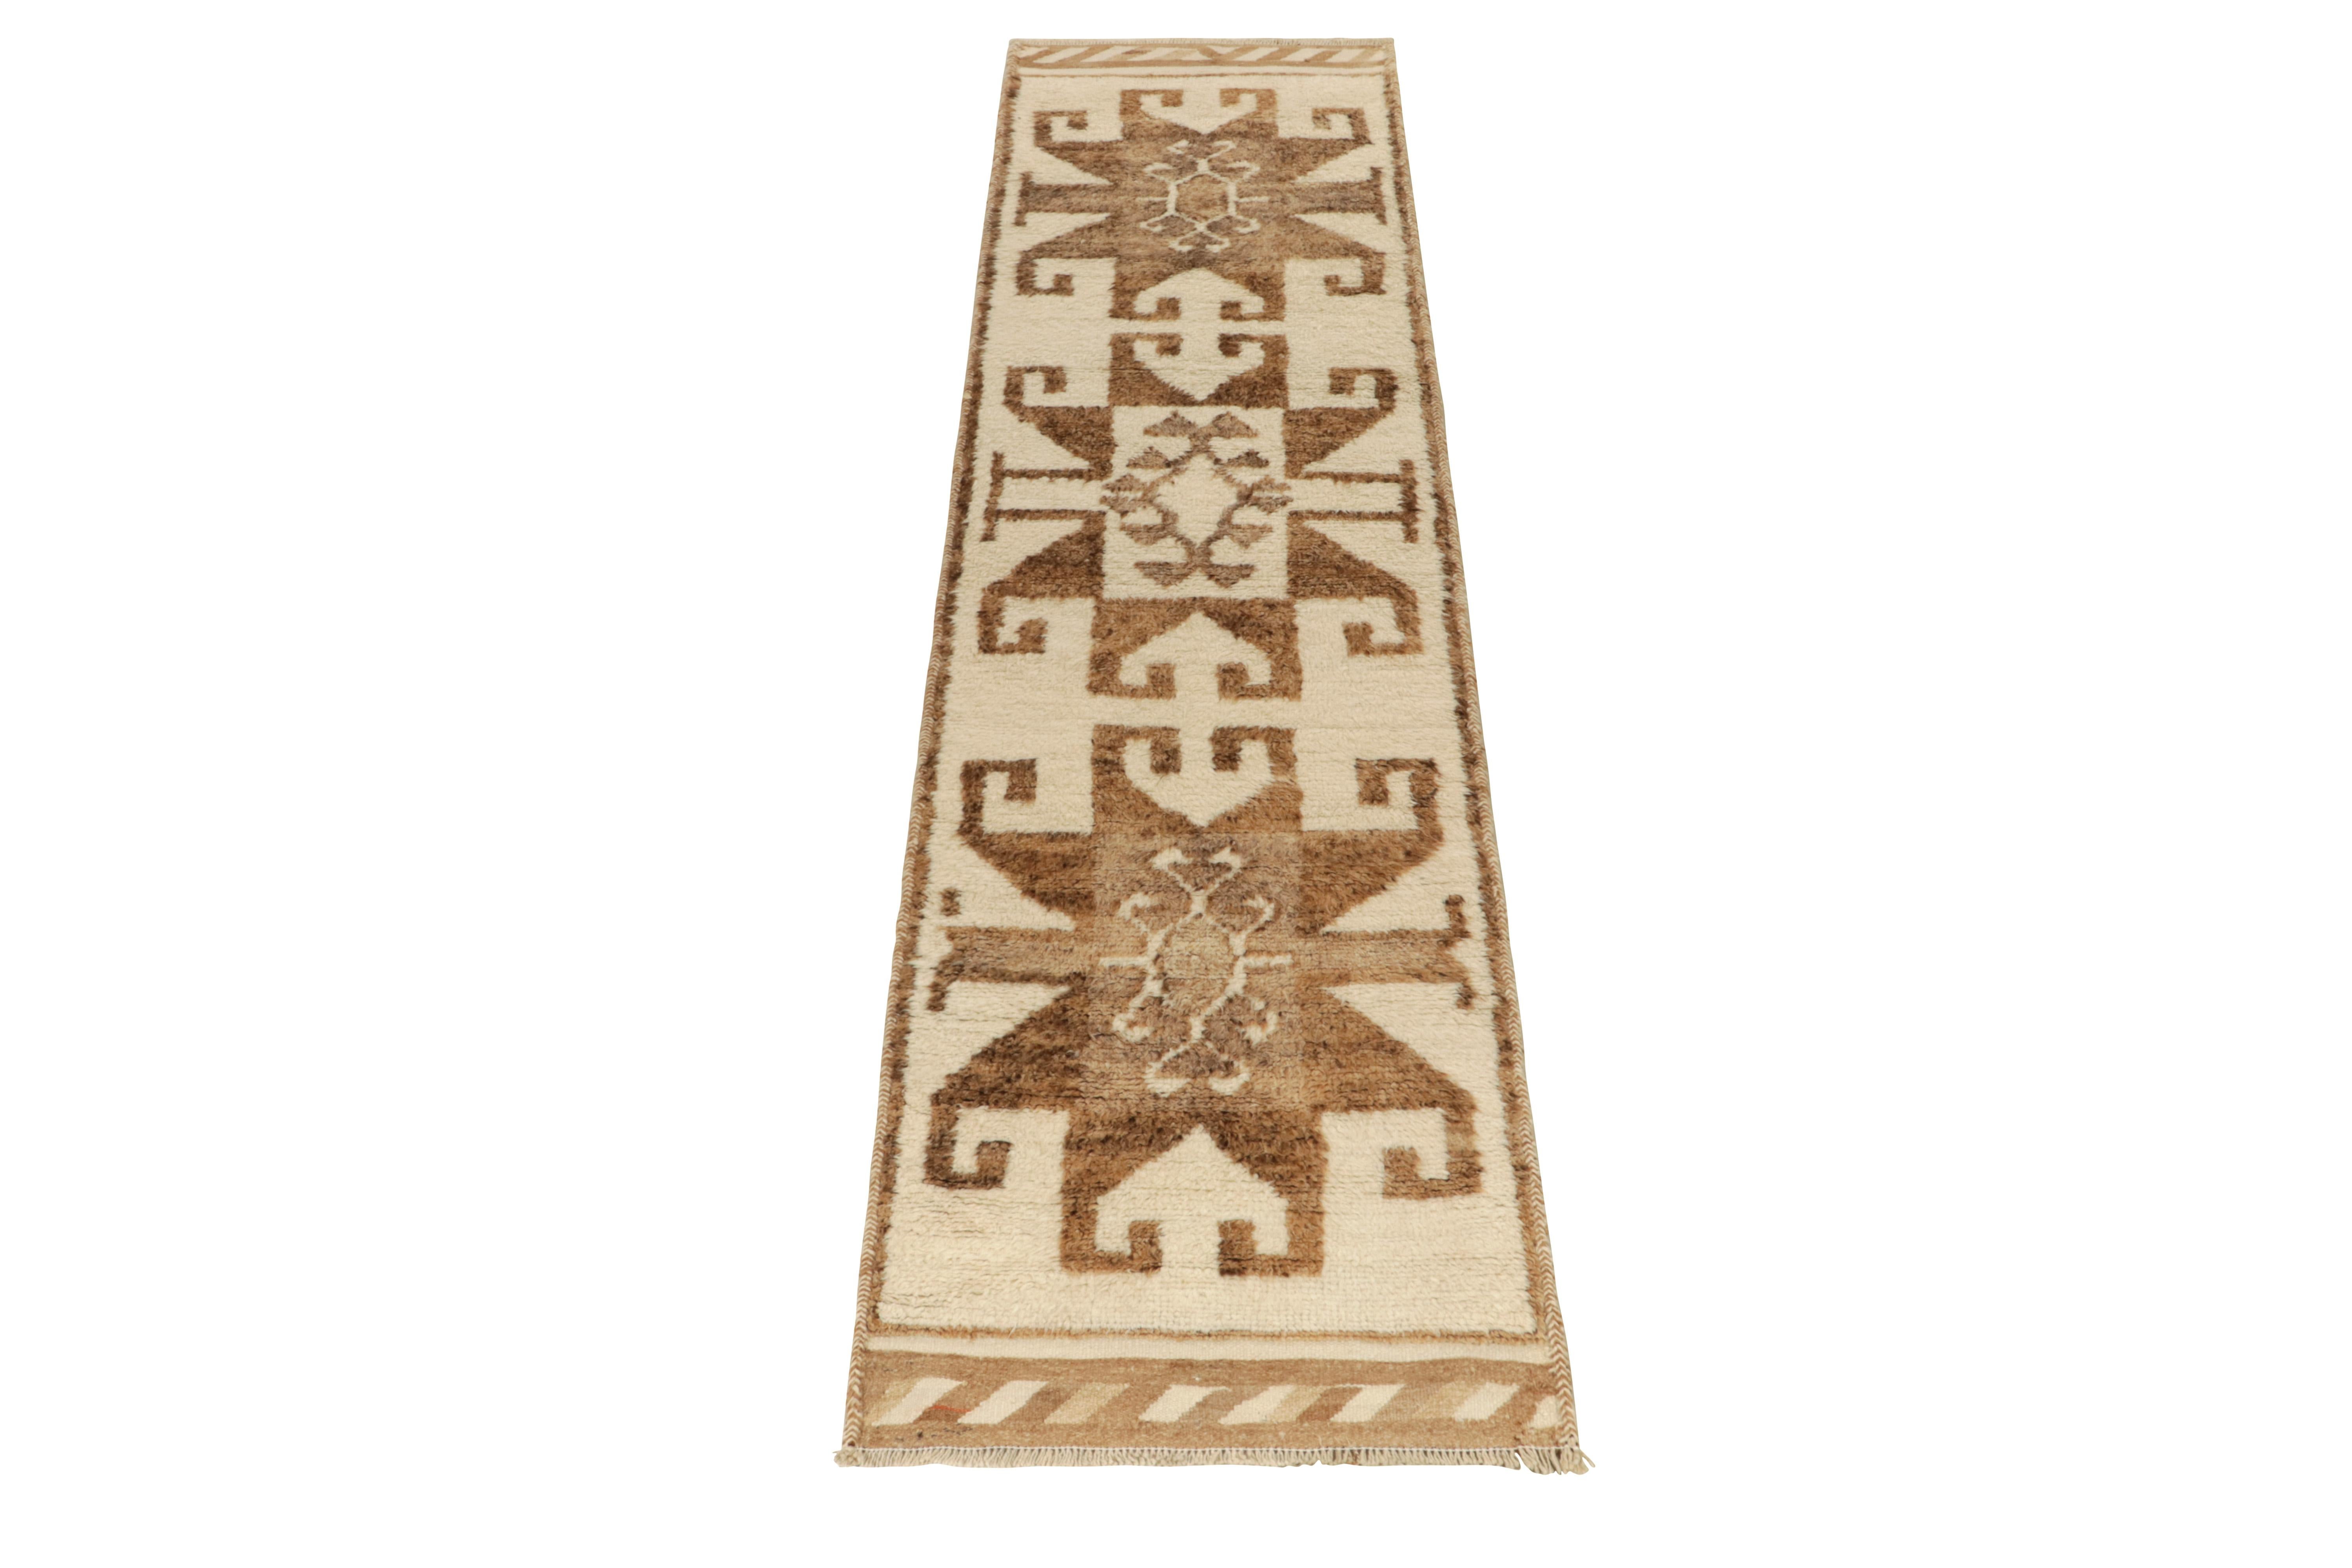 From Rug & Kilim’s vintage selections, a 3x12 hand-knotted wool runner from Turkey bearing textural nomadic appeal. 

The 1950s creation showcases a union of geometric repetition & tribal sensibilities with traditional motifs for a clean look in